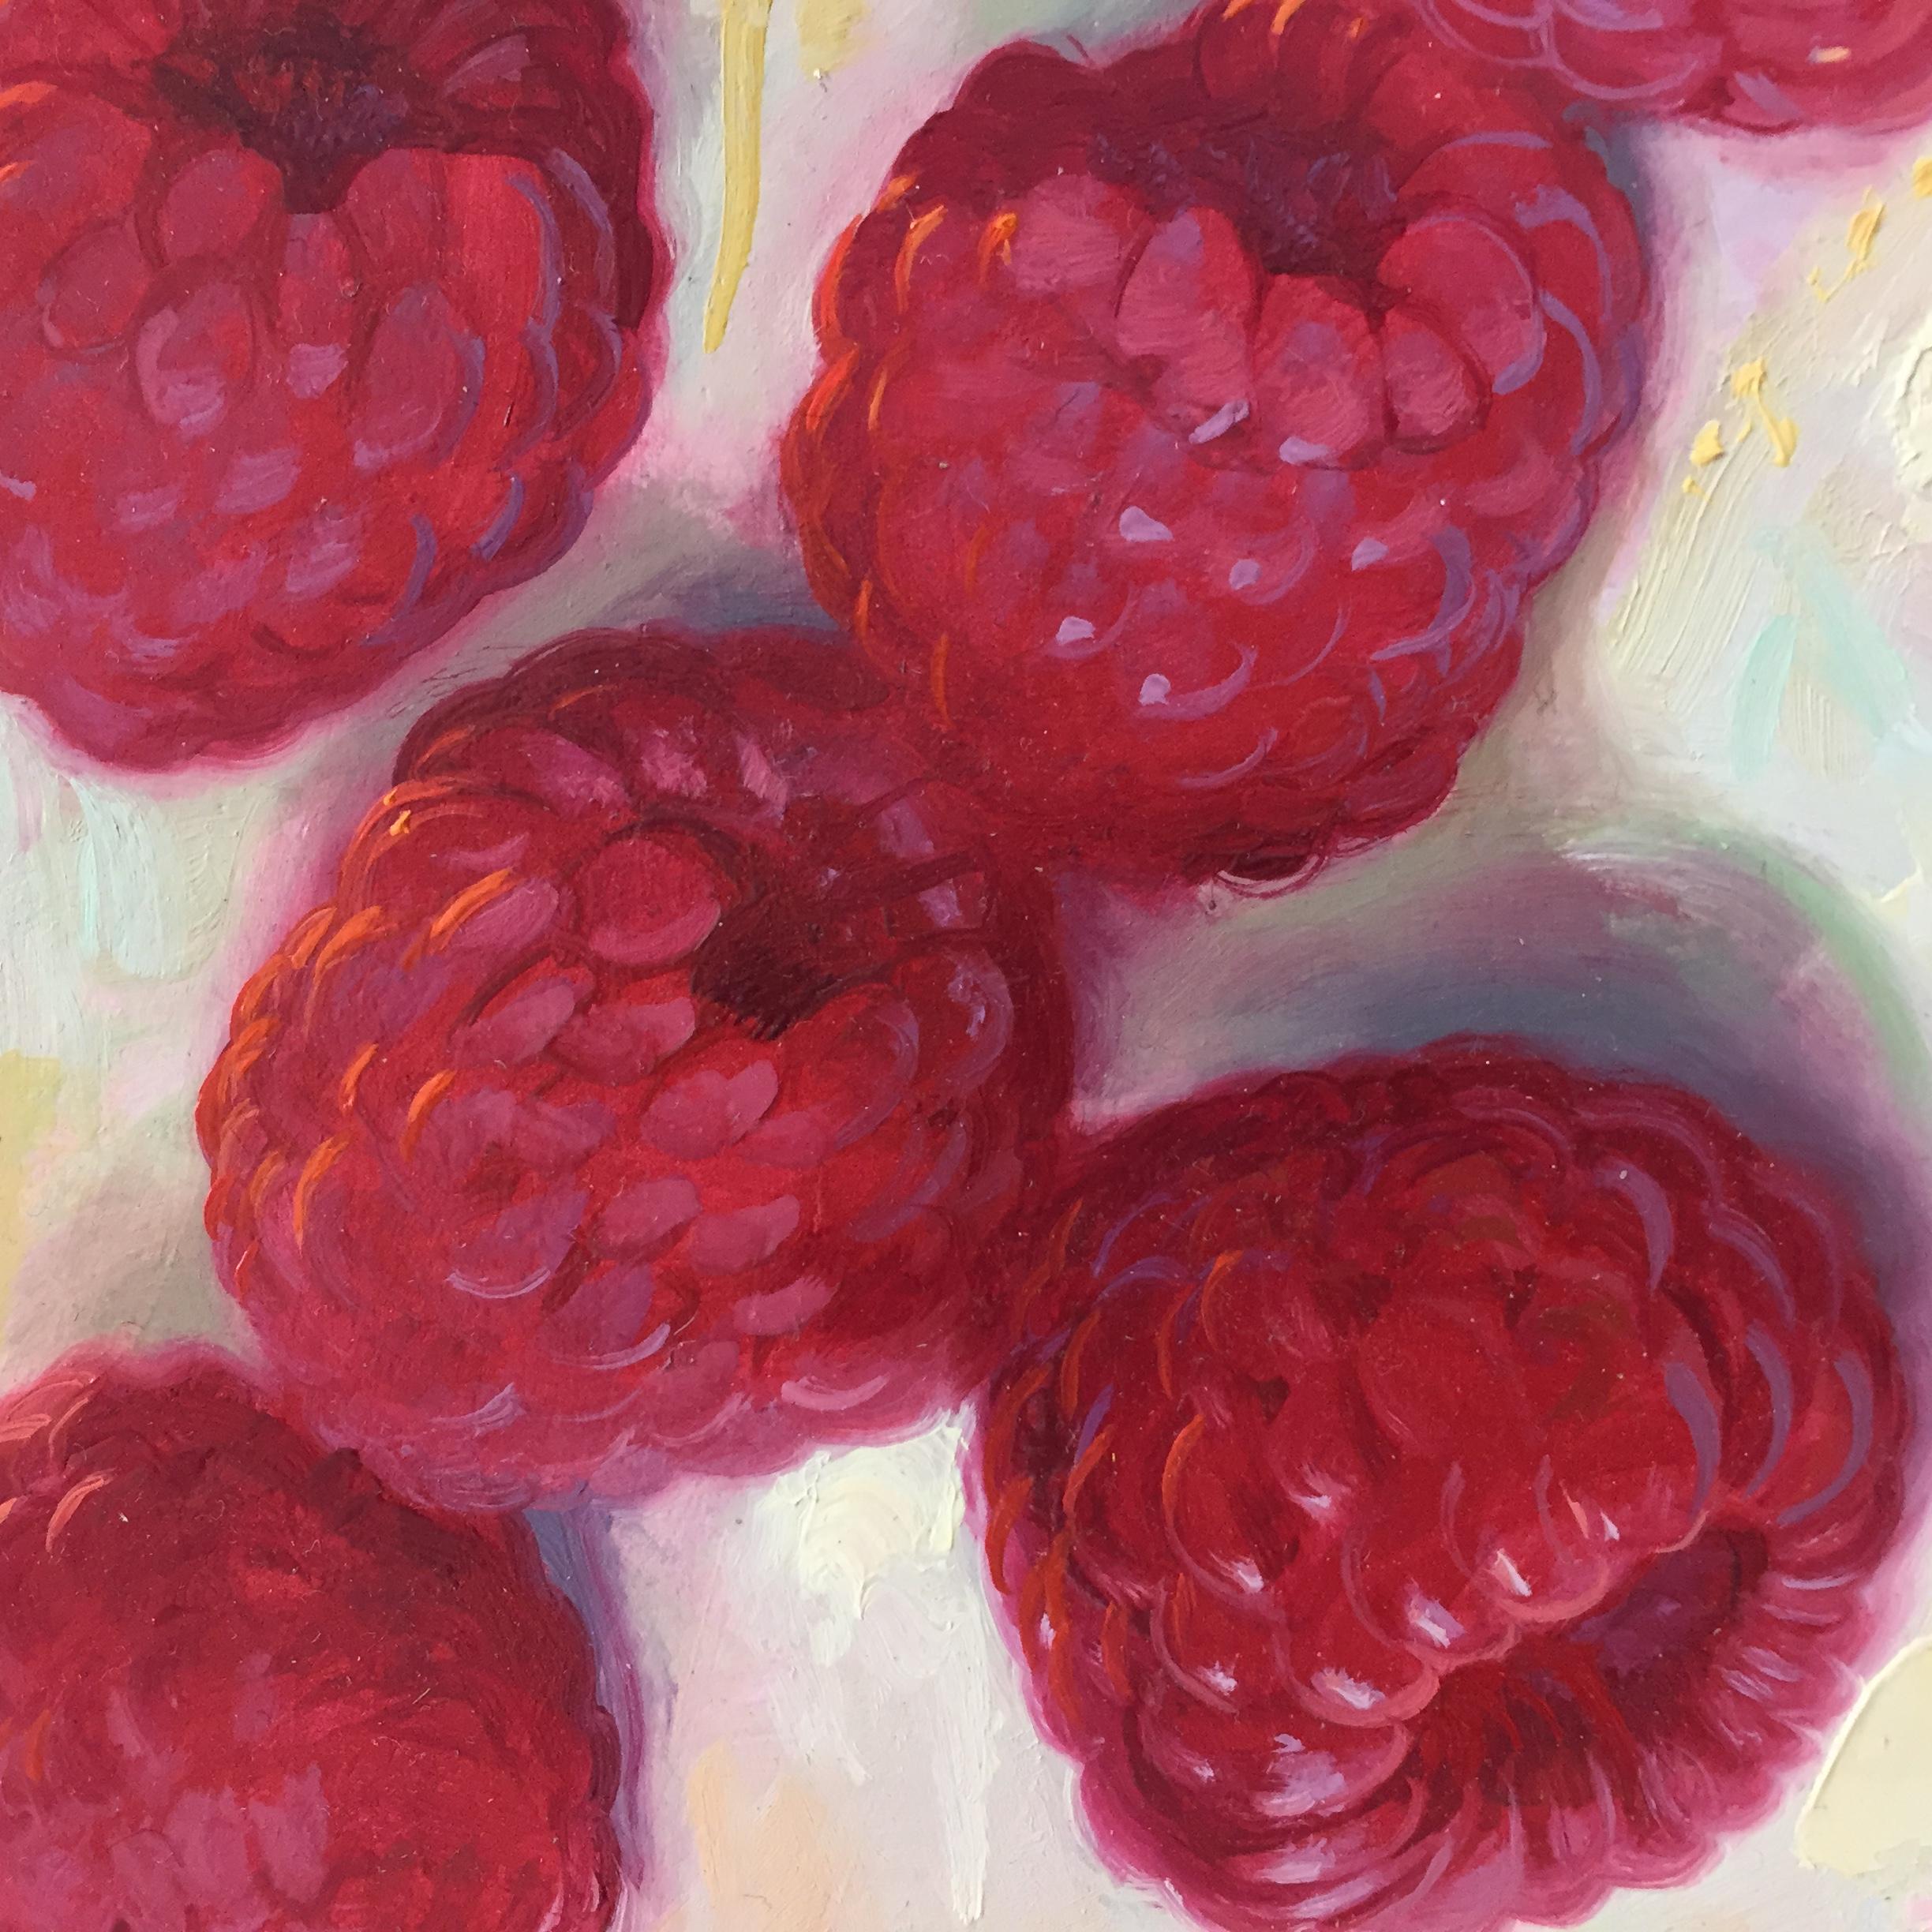 Raspberries- 21st Century Contemporary Still-life Painting by Dutch Painter - Brown Figurative Painting by Rutger Hiemstra